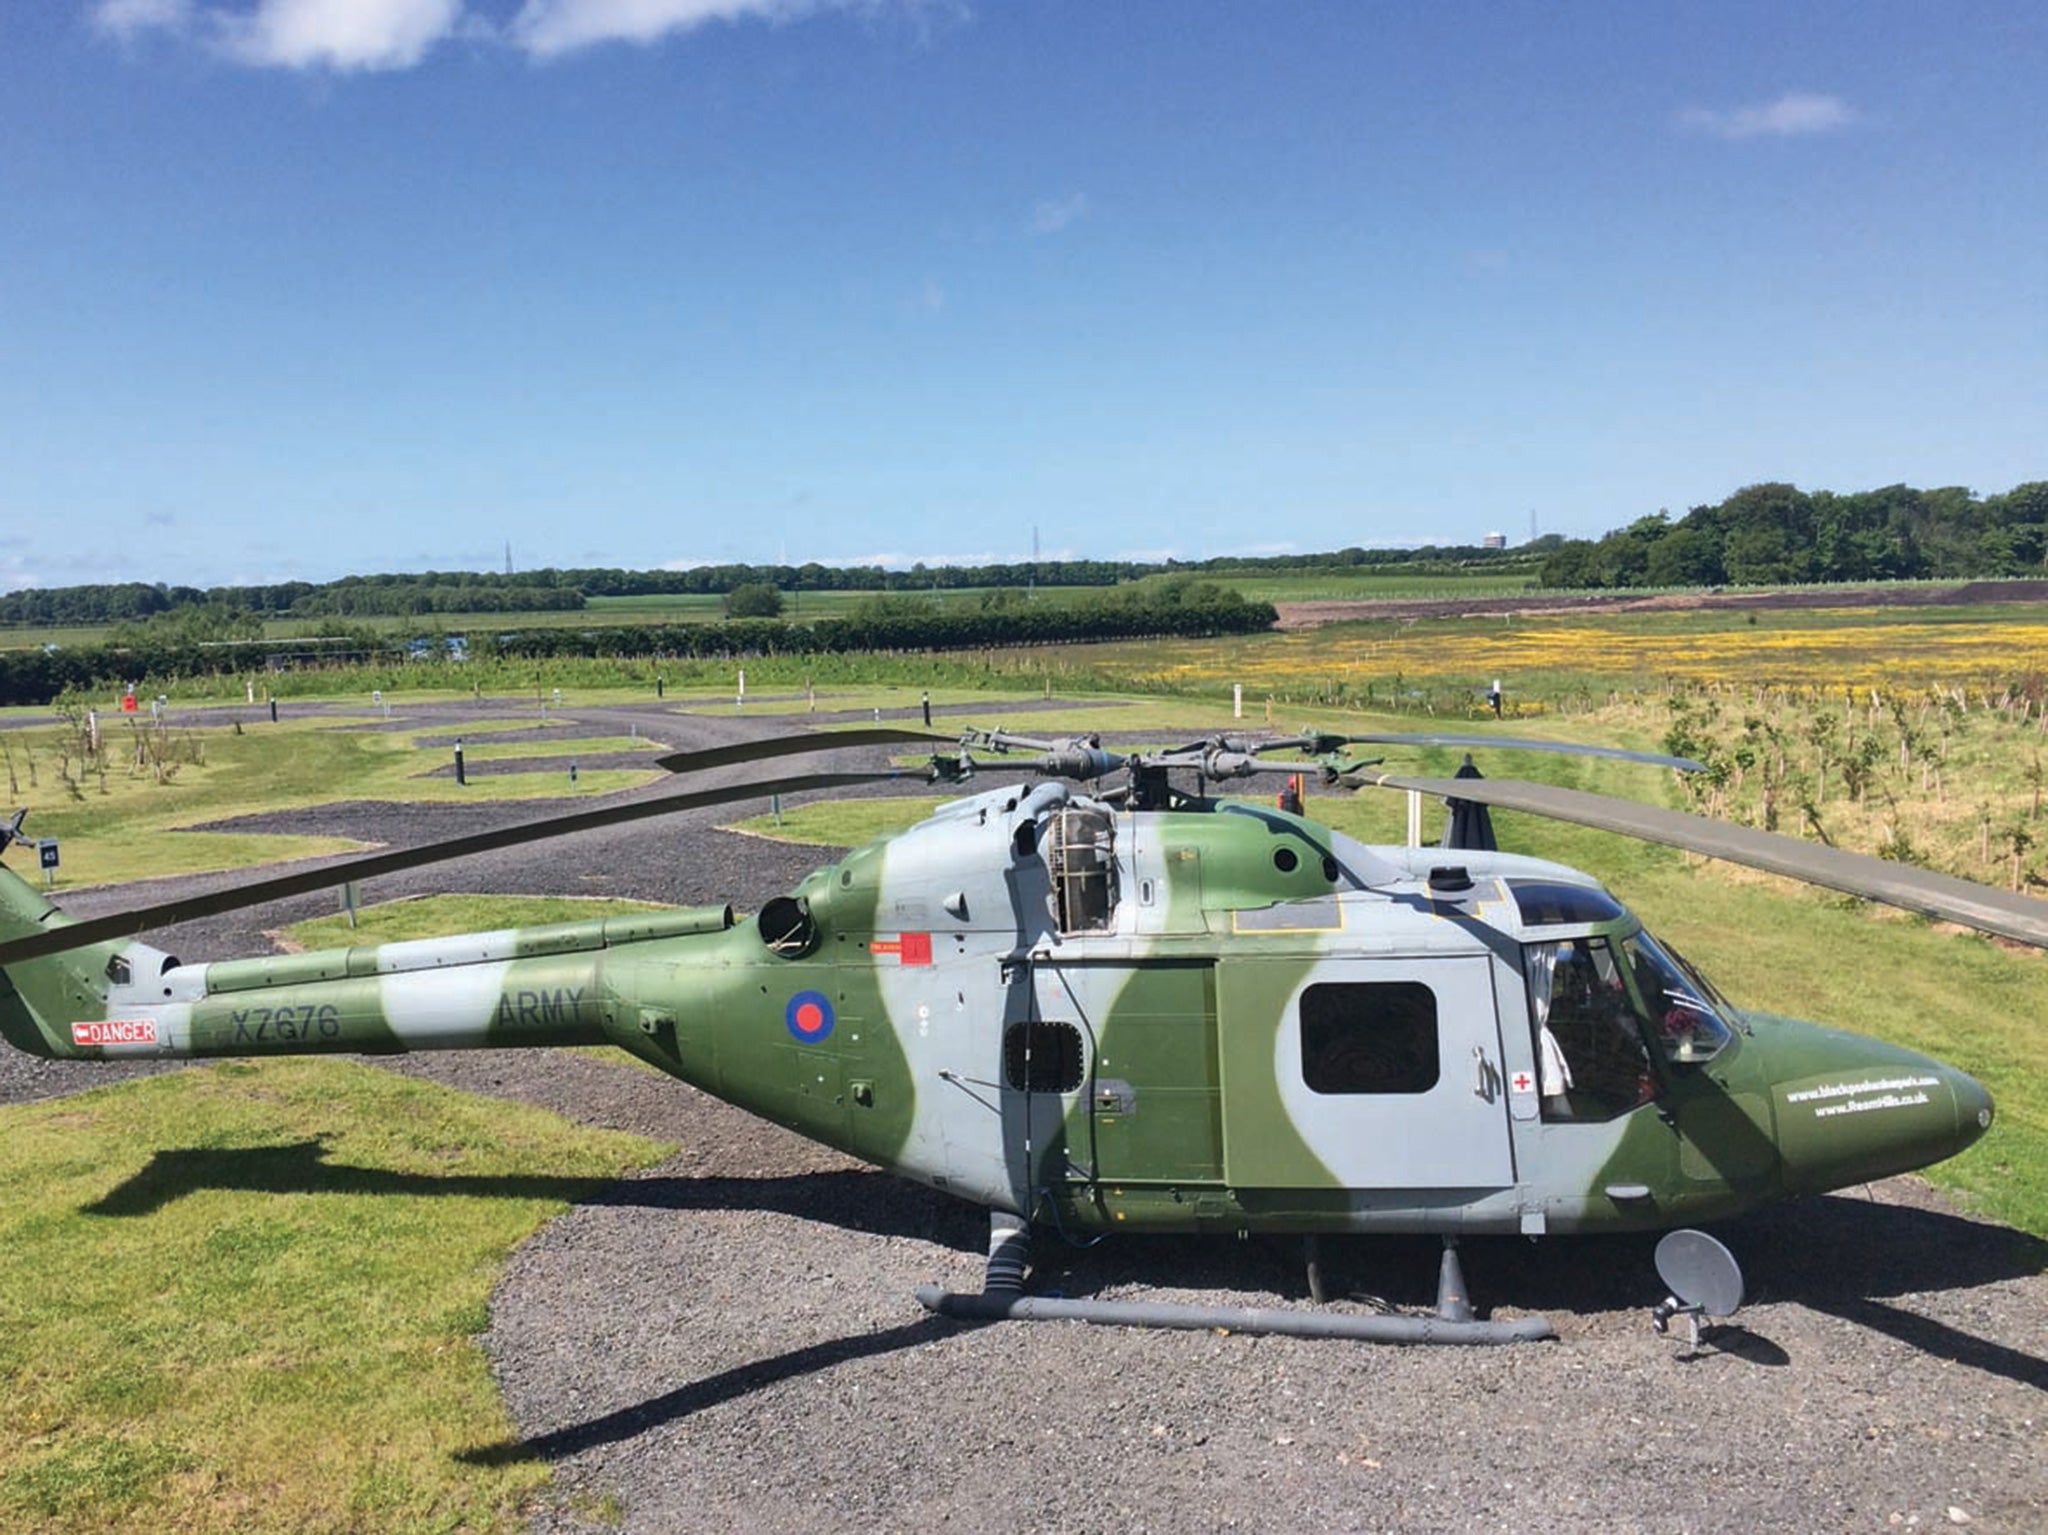 The converted ’copter, still in camouflage